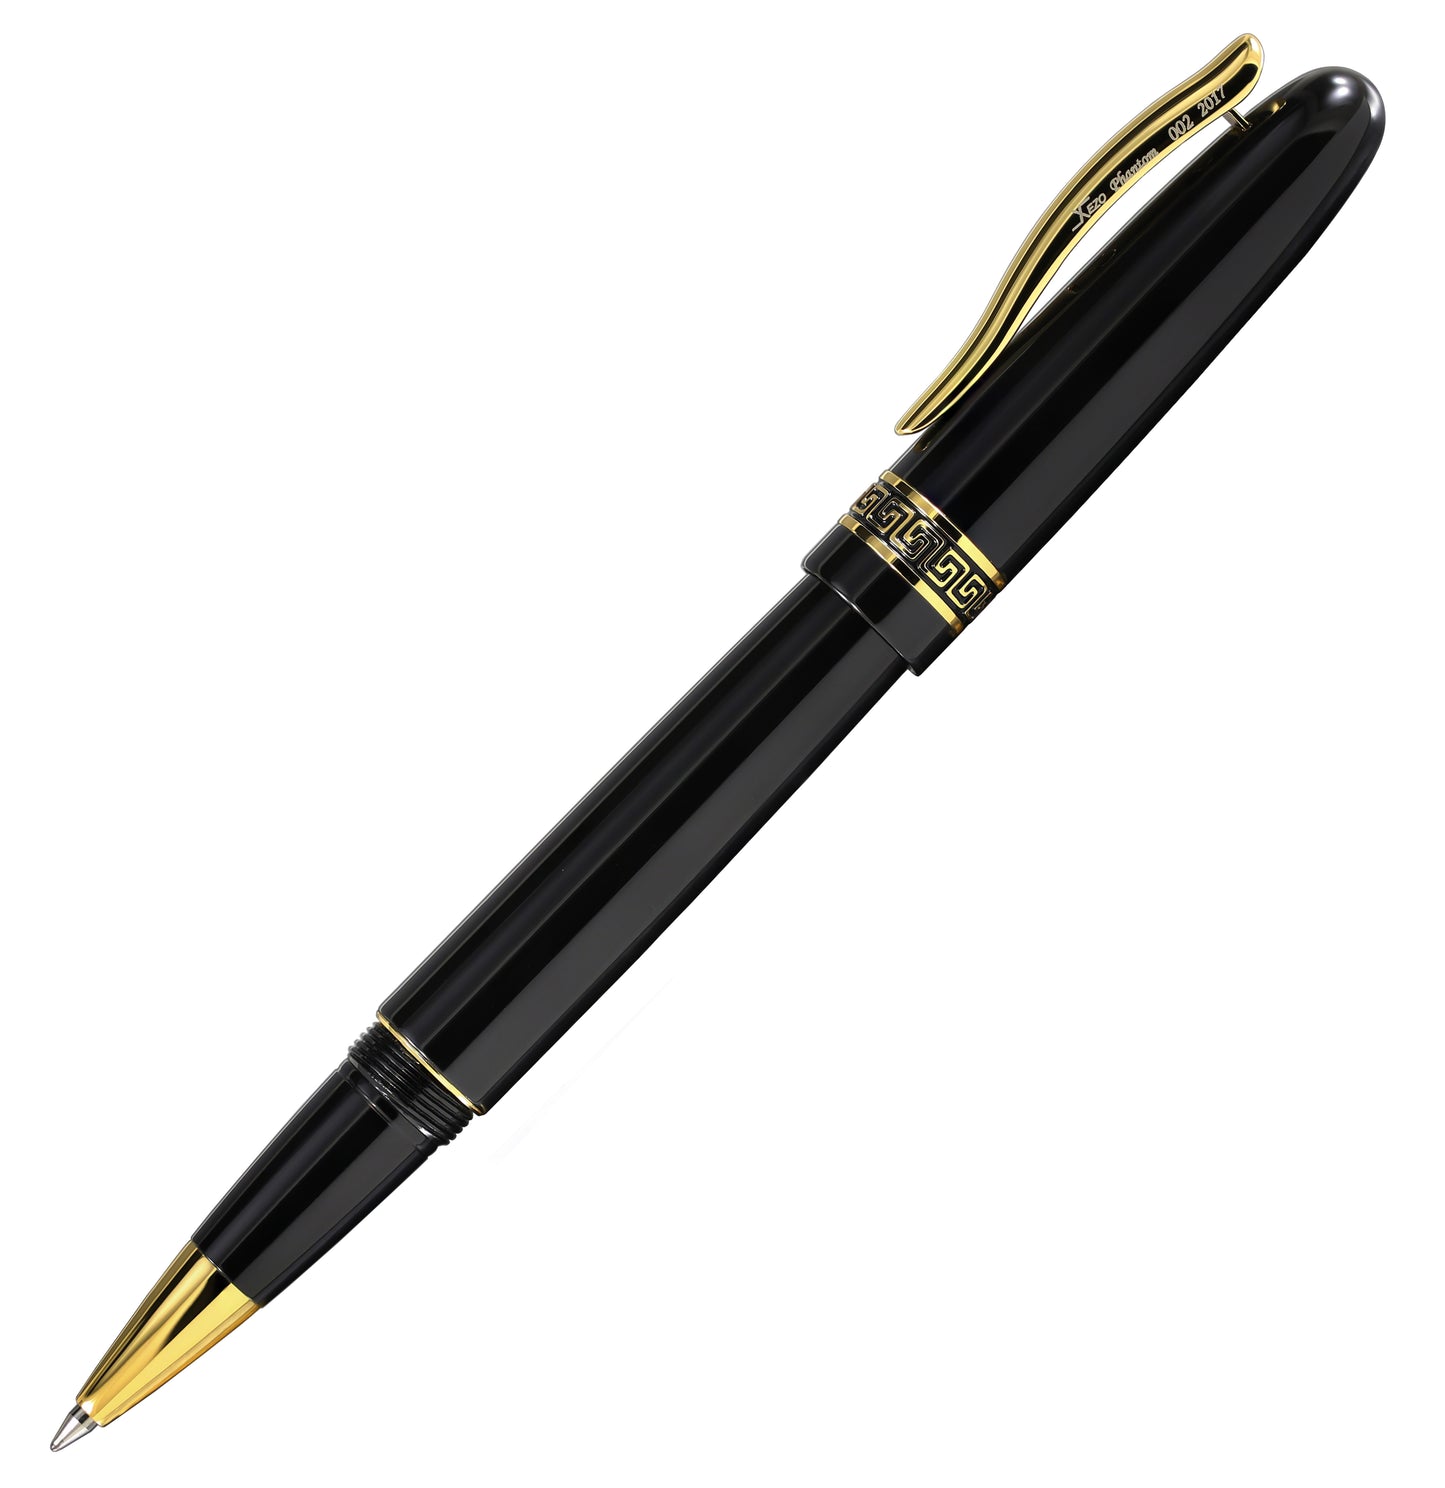 Xezo - Side view of the Phantom Classic Black R rollerball pen